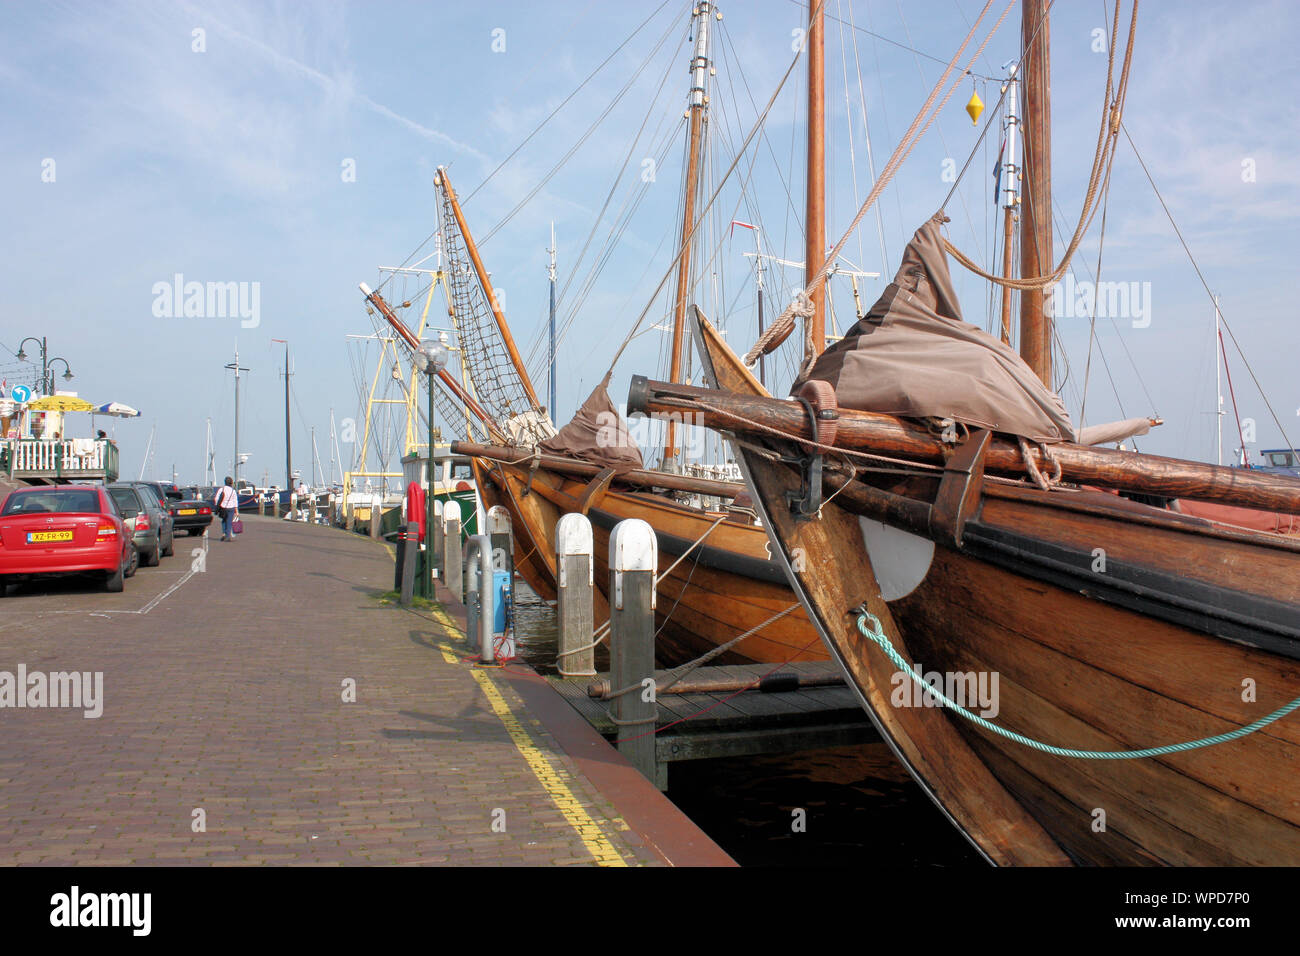 A lively shopping and residential street in Volendam where you see traditional wooden buildings on one side and fishing boats on the other side.. Stock Photo